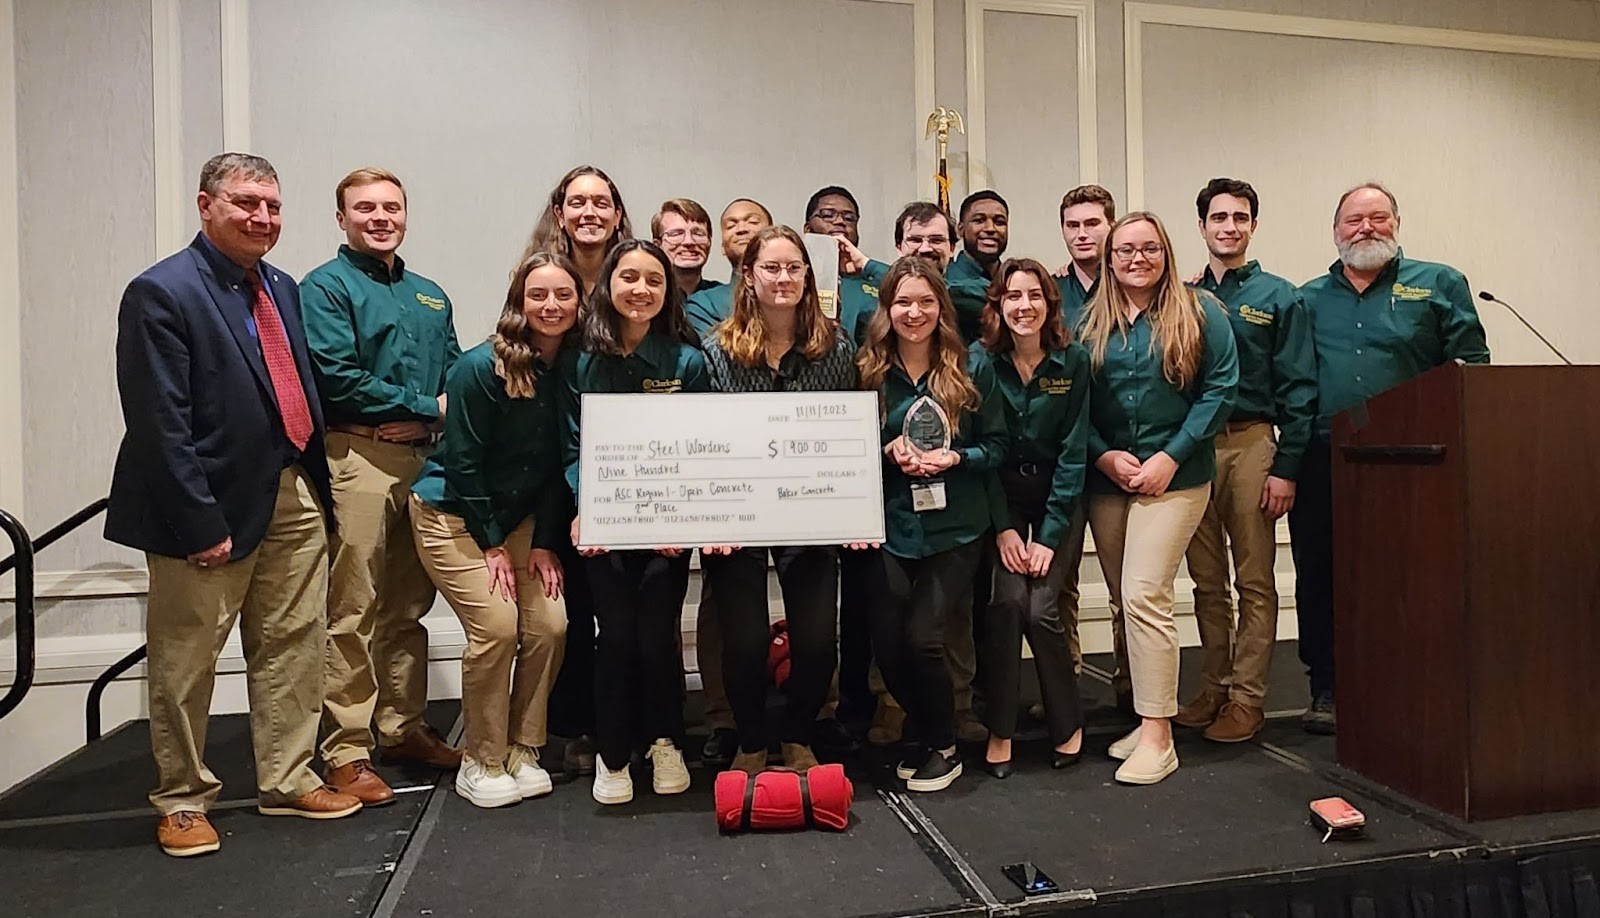 Students from Clarkson University’s Construction Engineering Management (CEM) Program, Student Projects in Engineering Experience and Design (SPEED) teams pose with prize money checkce